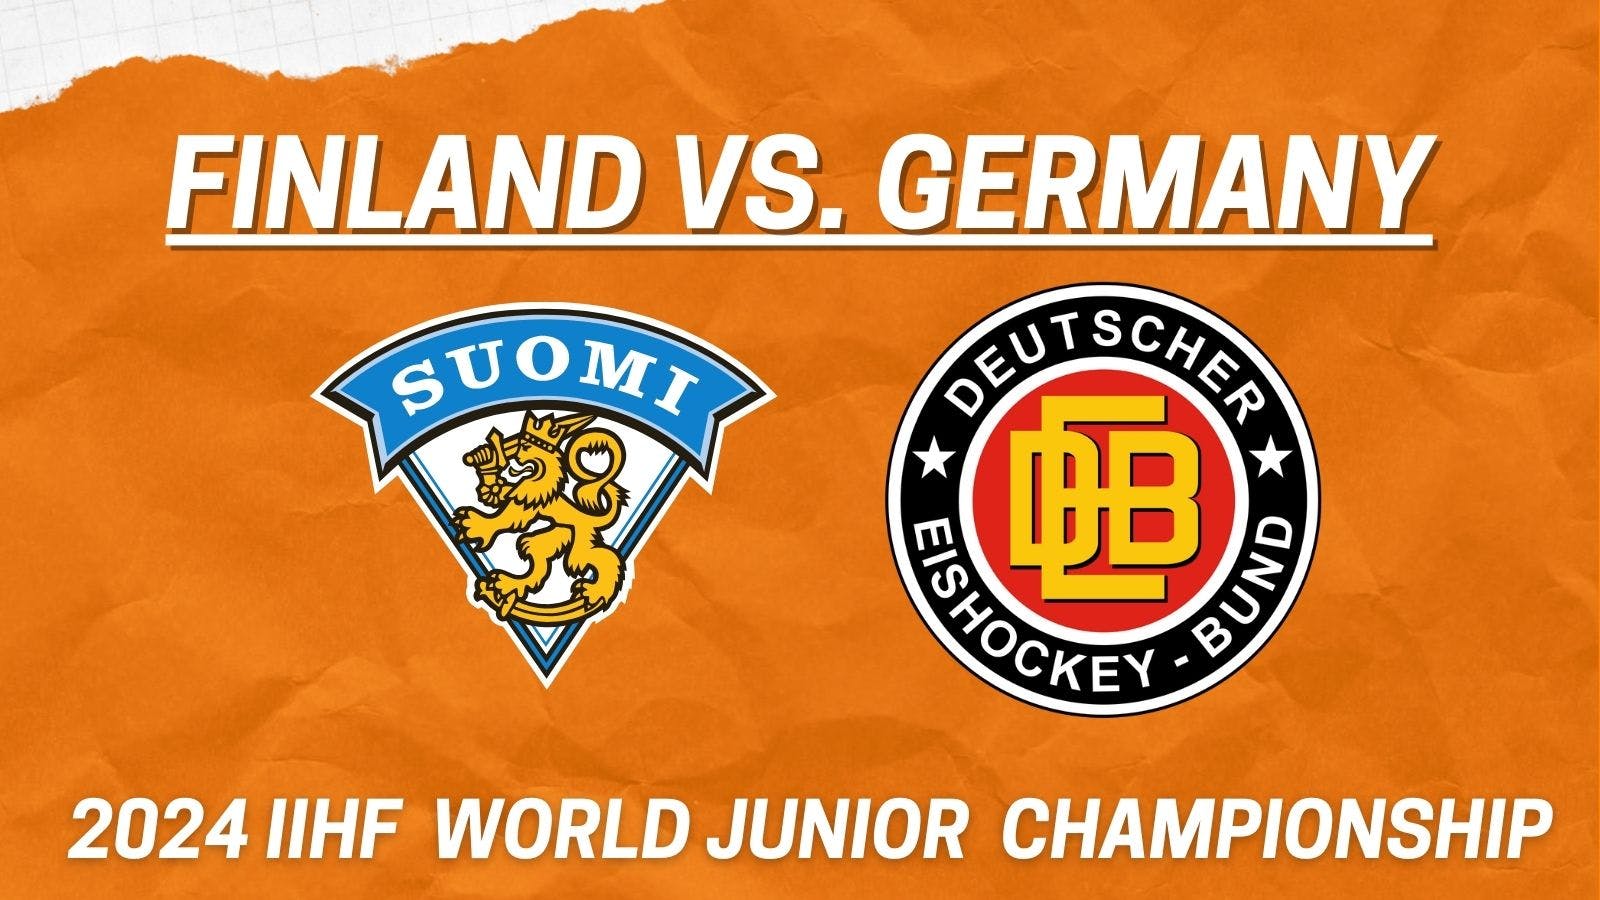 Top standouts from Finland vs. Germany at 2024 World Junior Championship